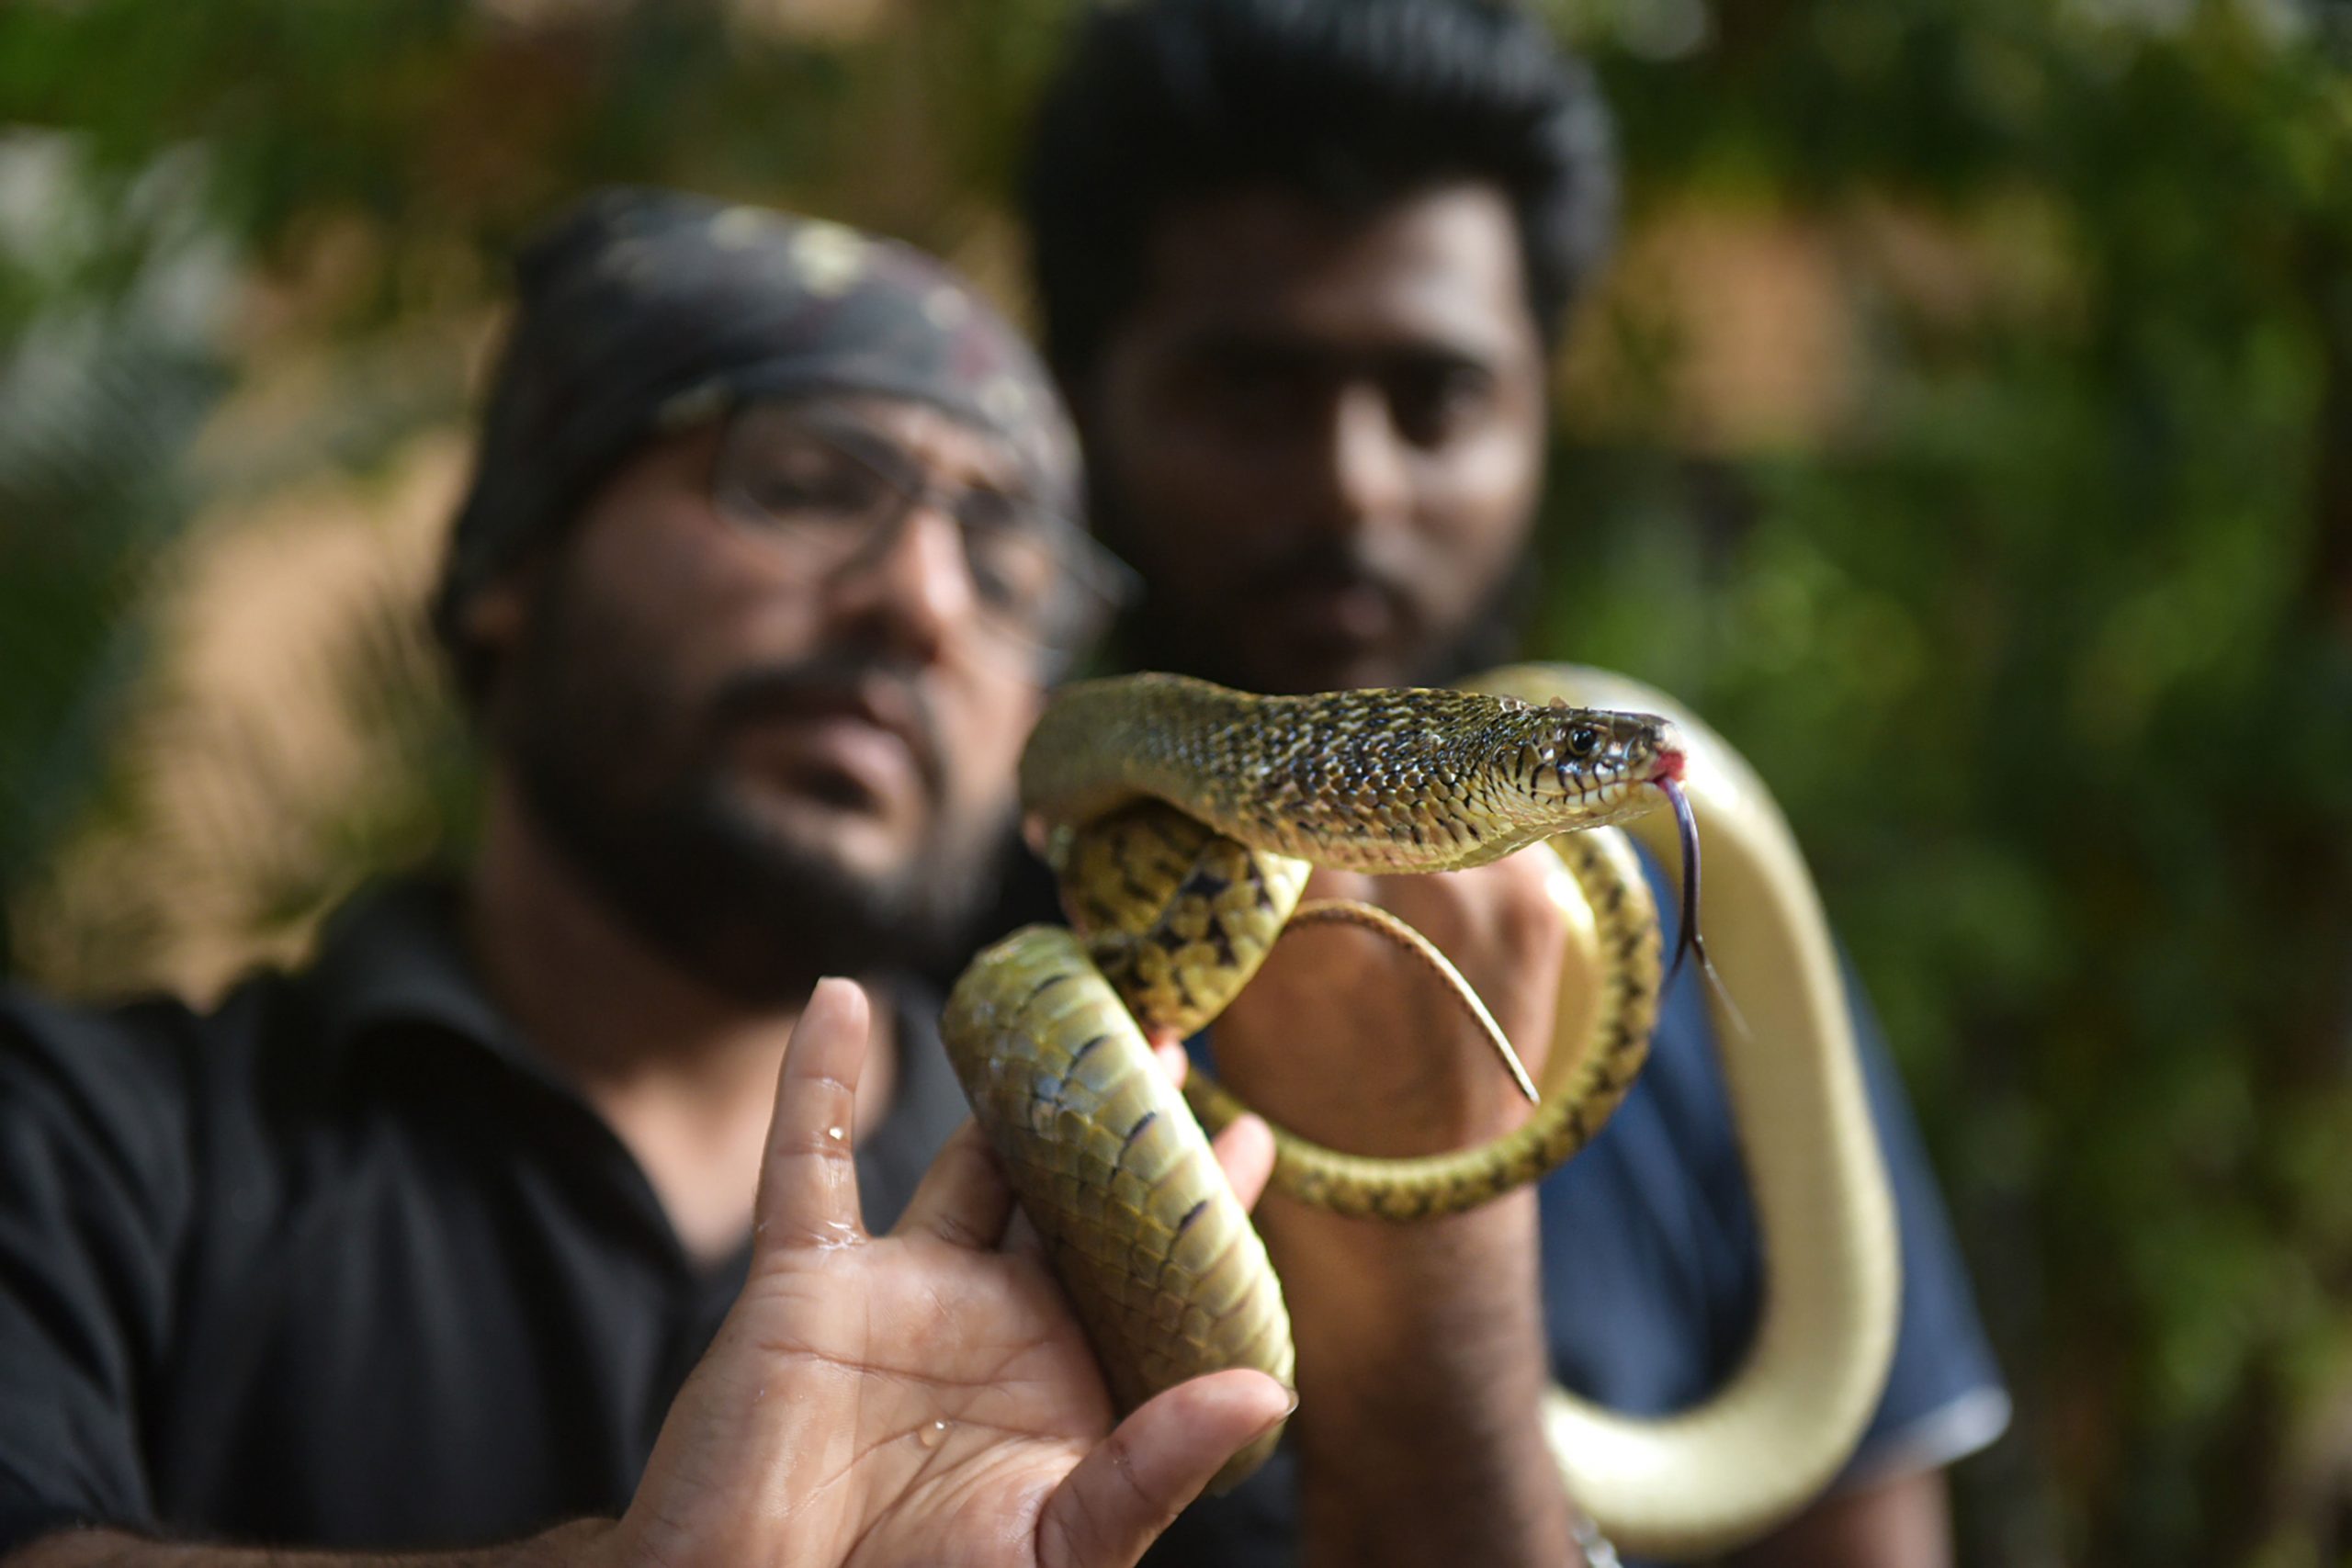 Watch: Man catches 14-feet King Cobra with his bare hands